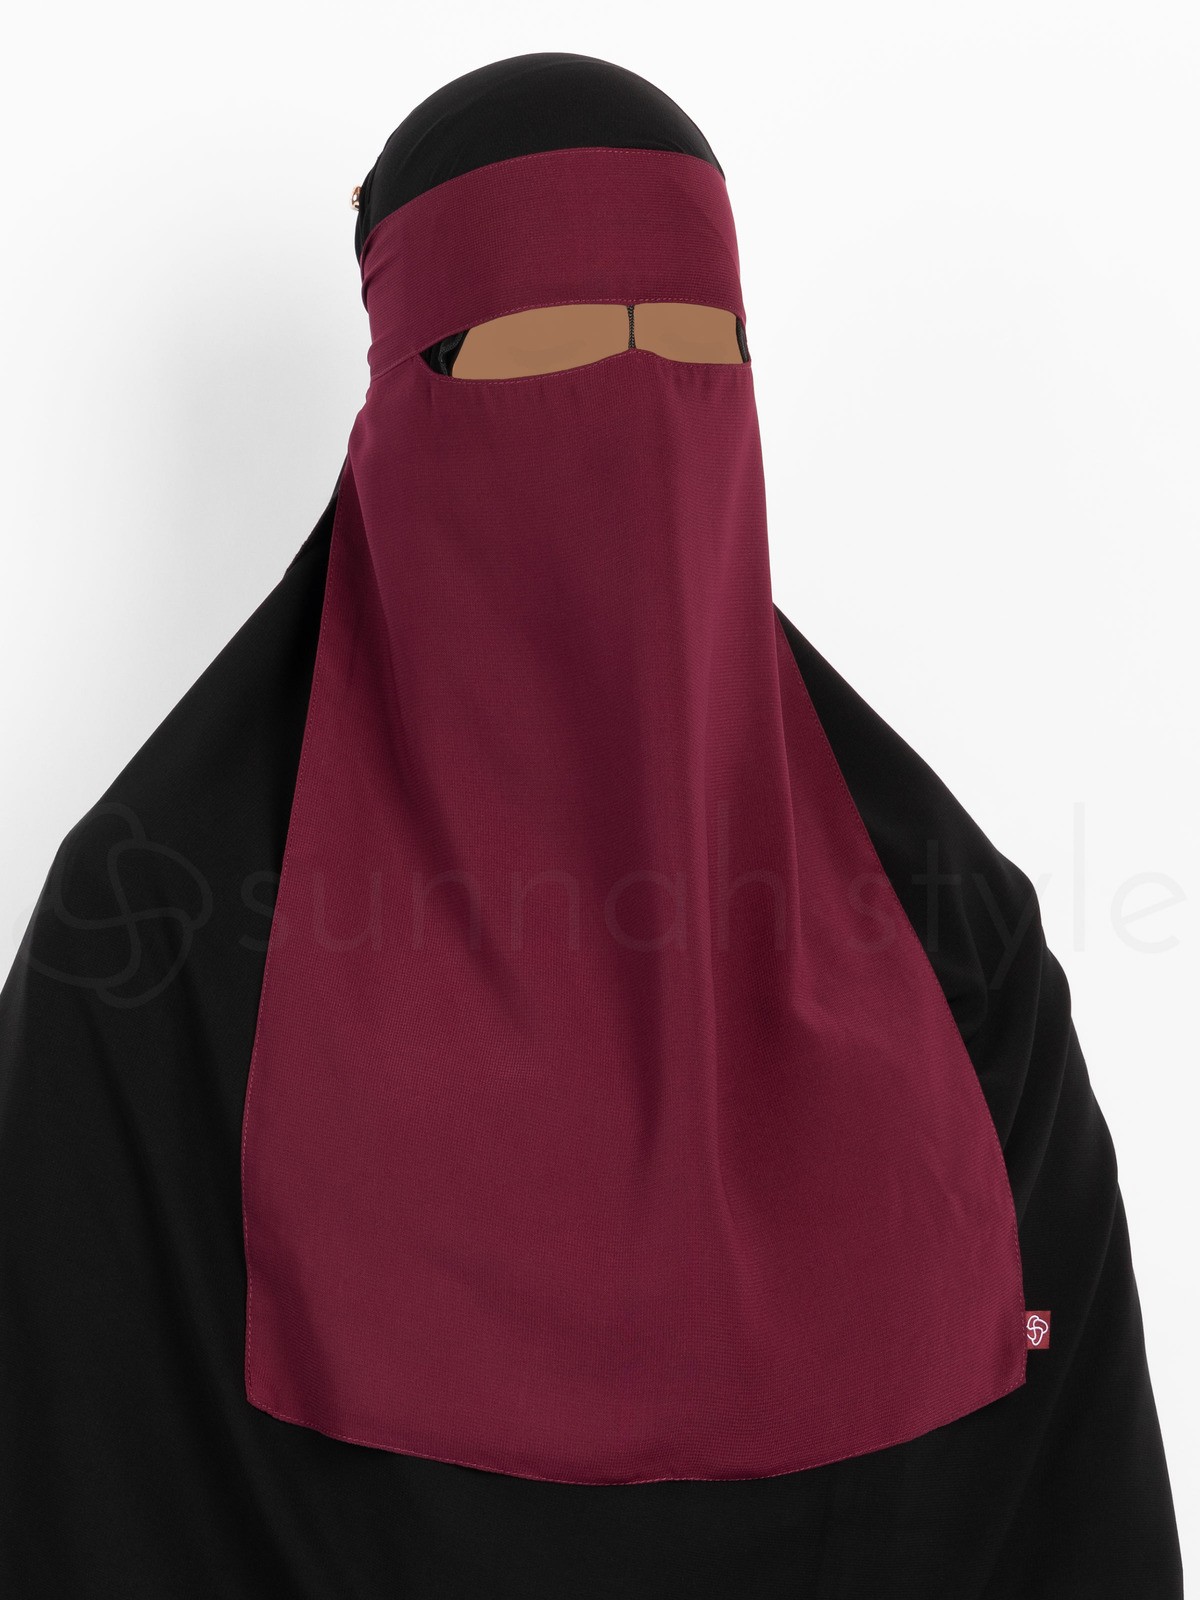 Sunnah Style - One Layer Niqab /w Nose String (Black)